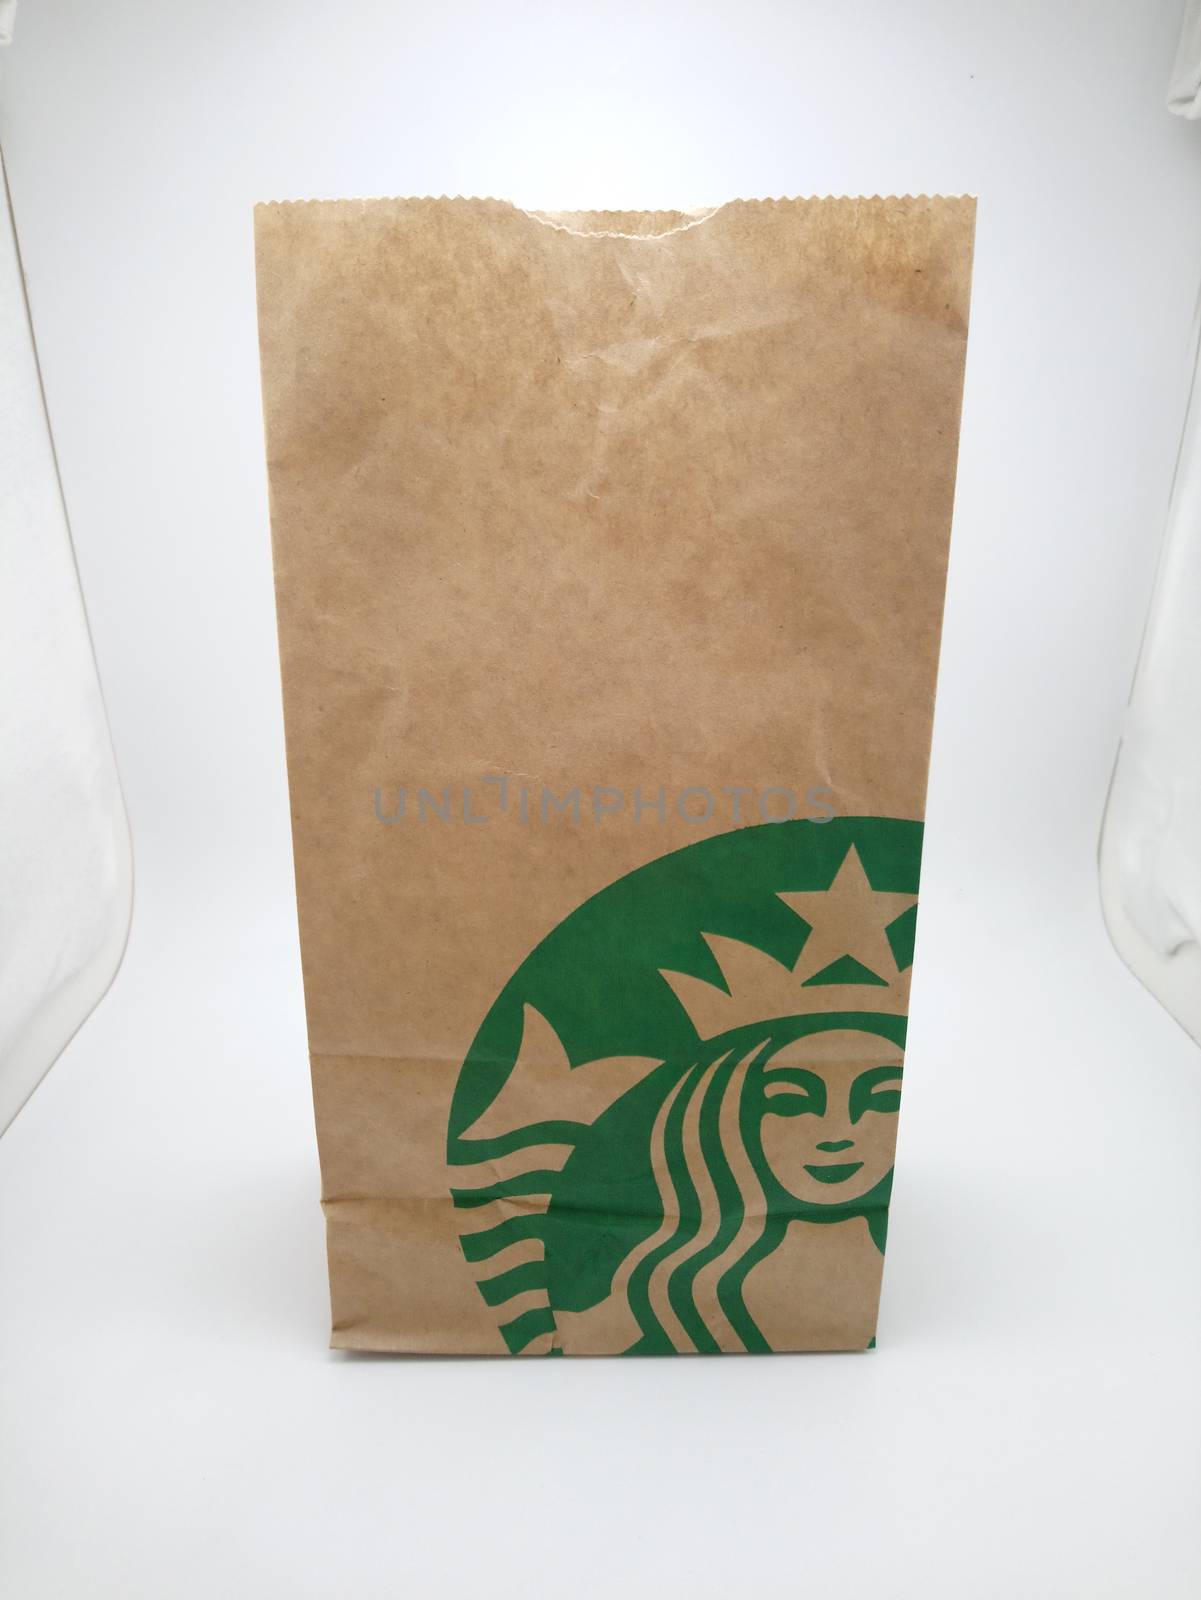 Starbucks brown bag in Manila, Philippines by imwaltersy